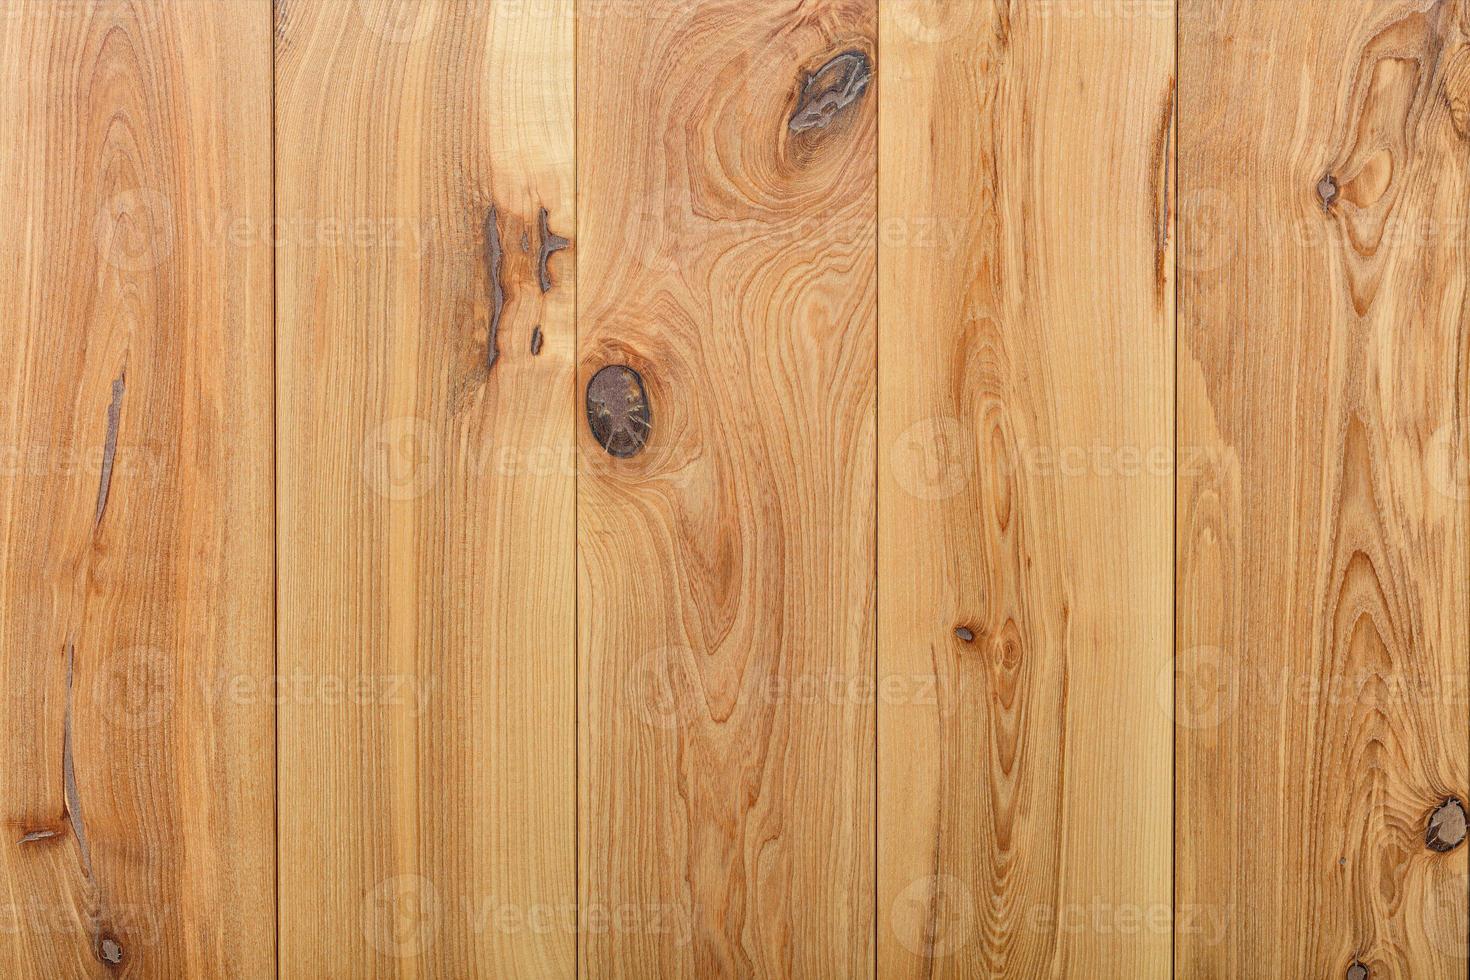 Vertical wooden planks with a pronounced texture of fibers and knots. photo